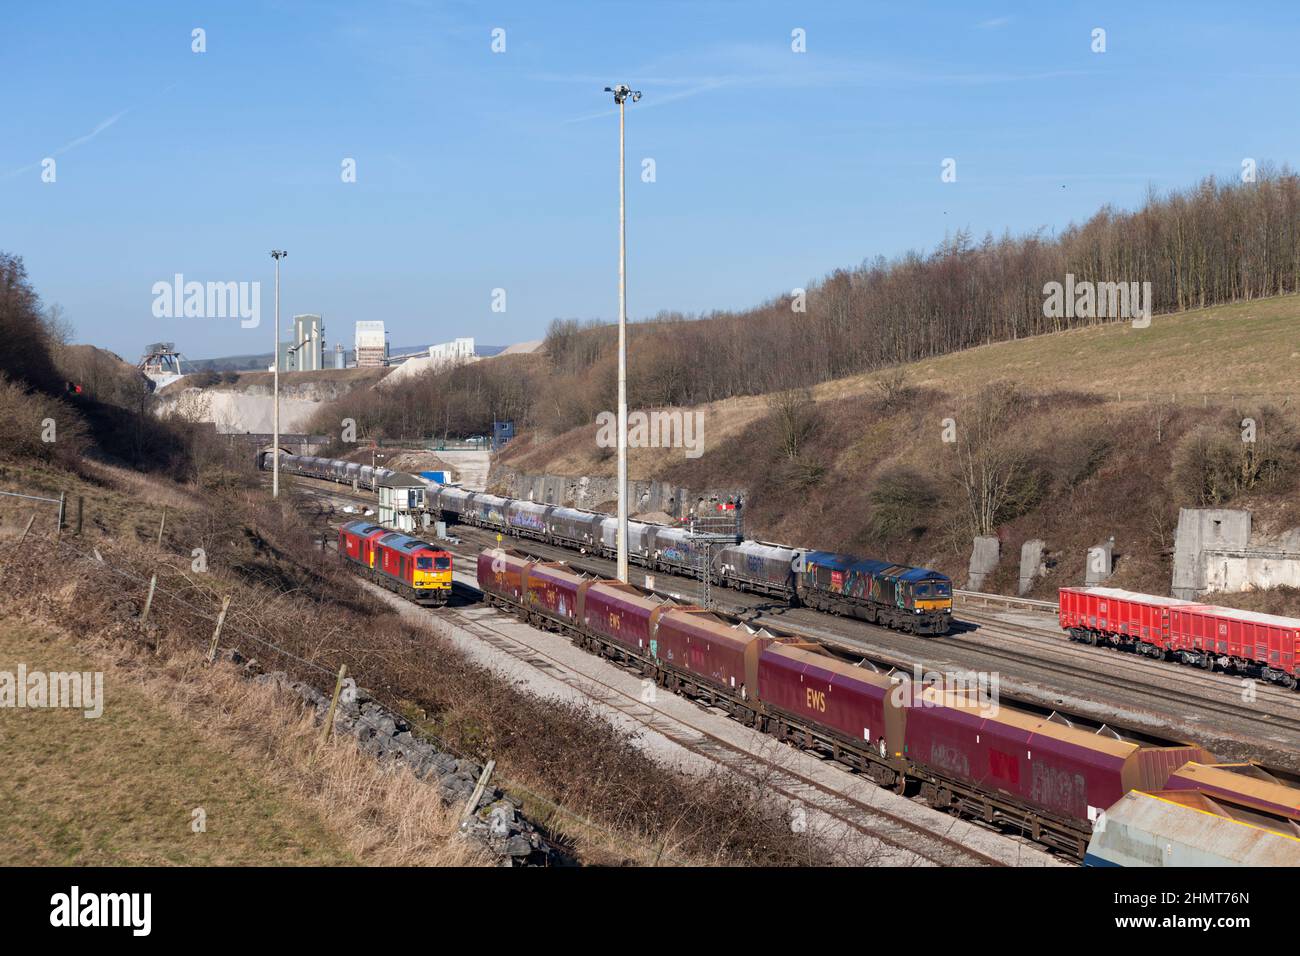 GB Railfreight class 66 locomotive and DB cargo class 60 locomotives with freight trains at Peak Forest in the Derbyshire peak district Stock Photo